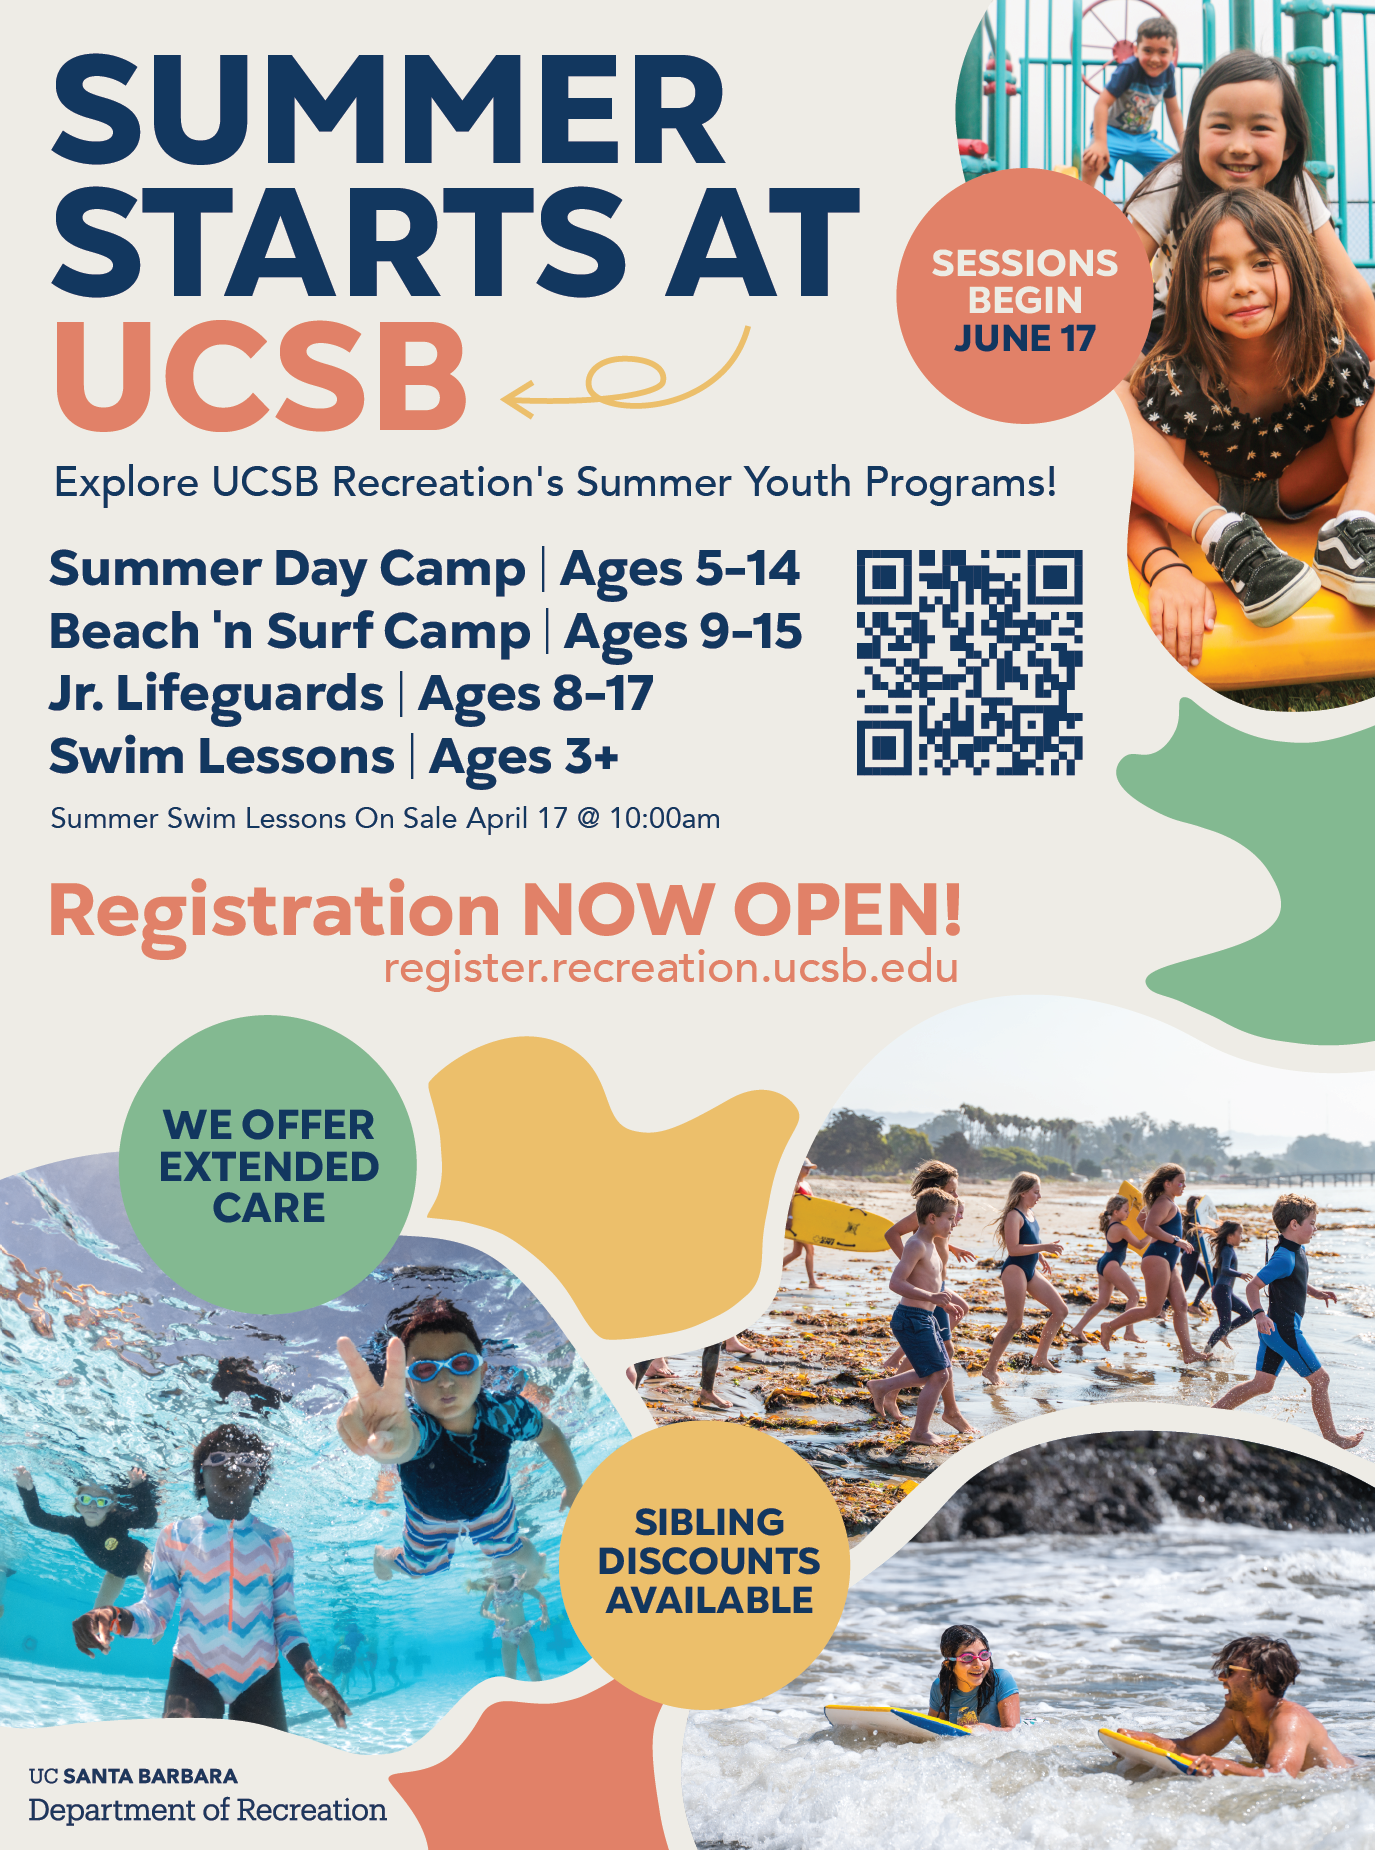 UCSB Recreation Summer Youth Programs